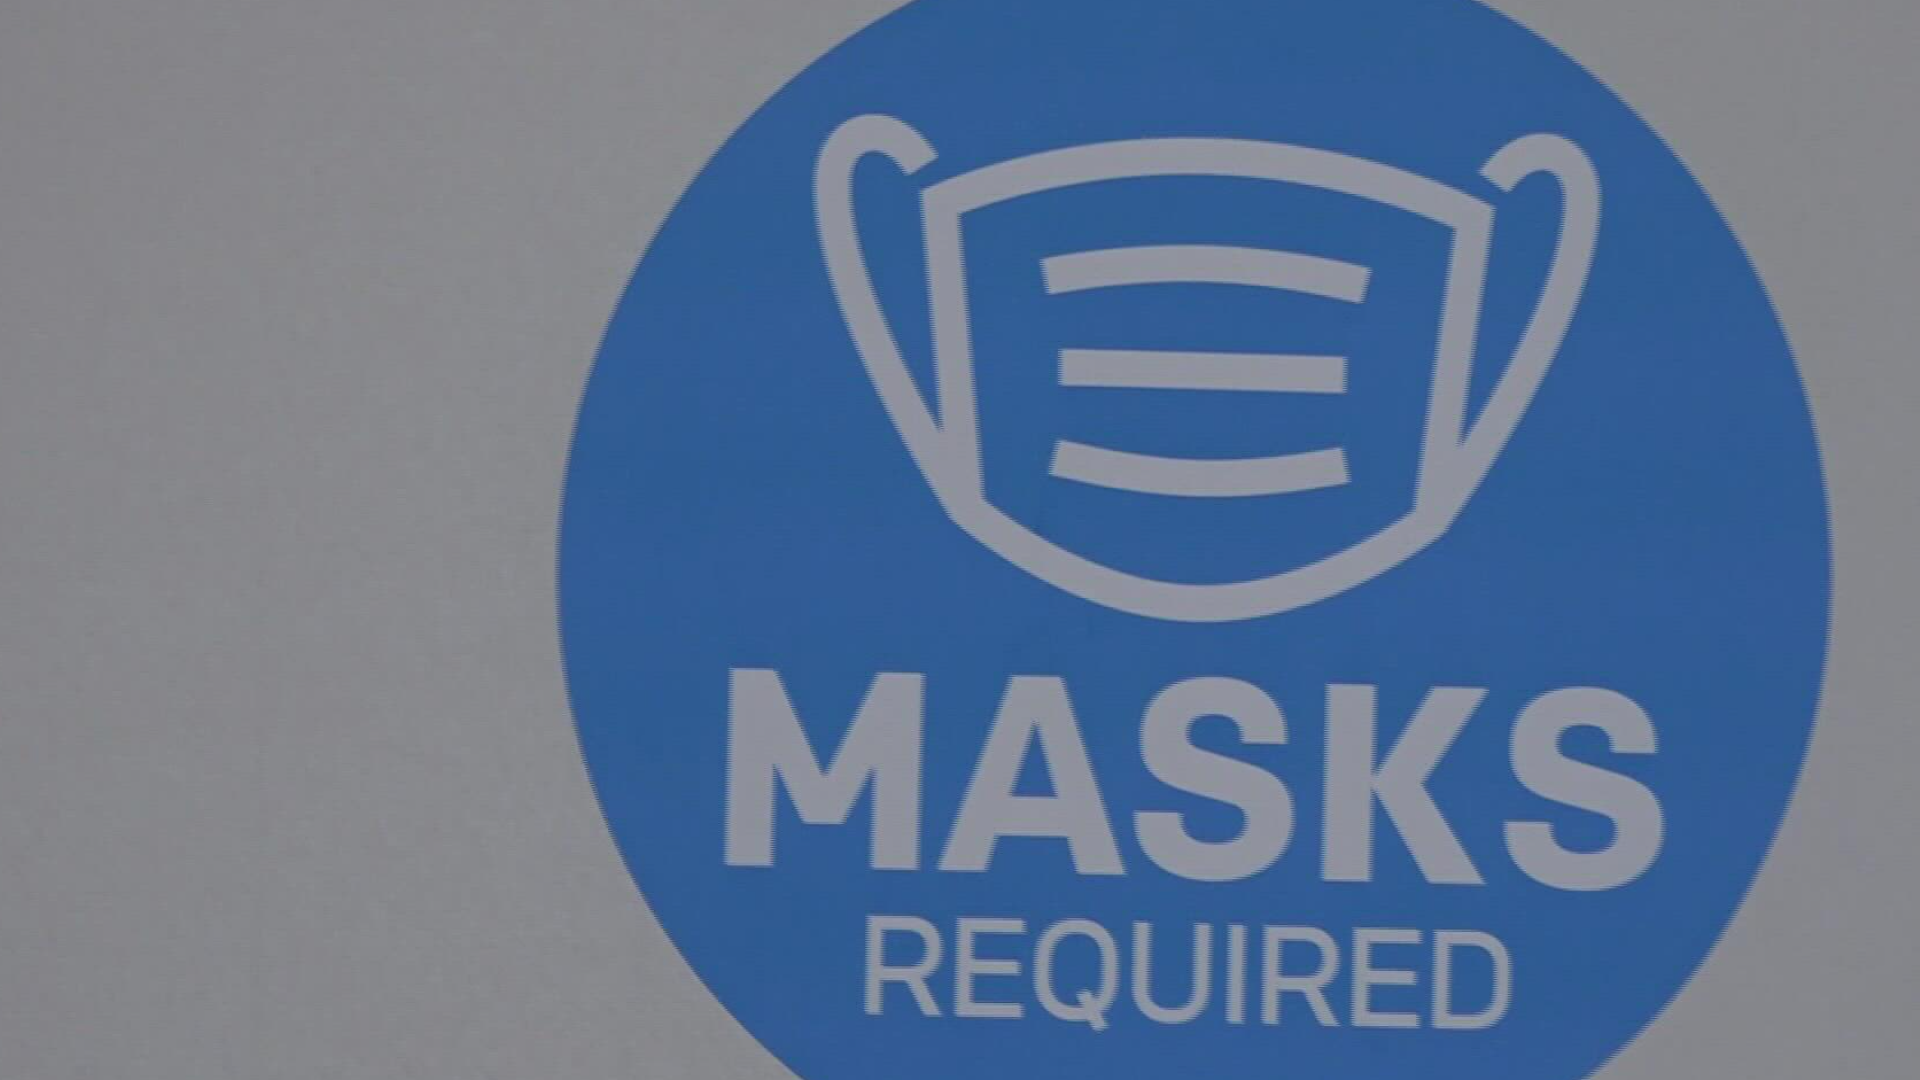 Hixson Middle School in the Webster Groves School District is requiring masks again after a rise in new COVID-19 cases.